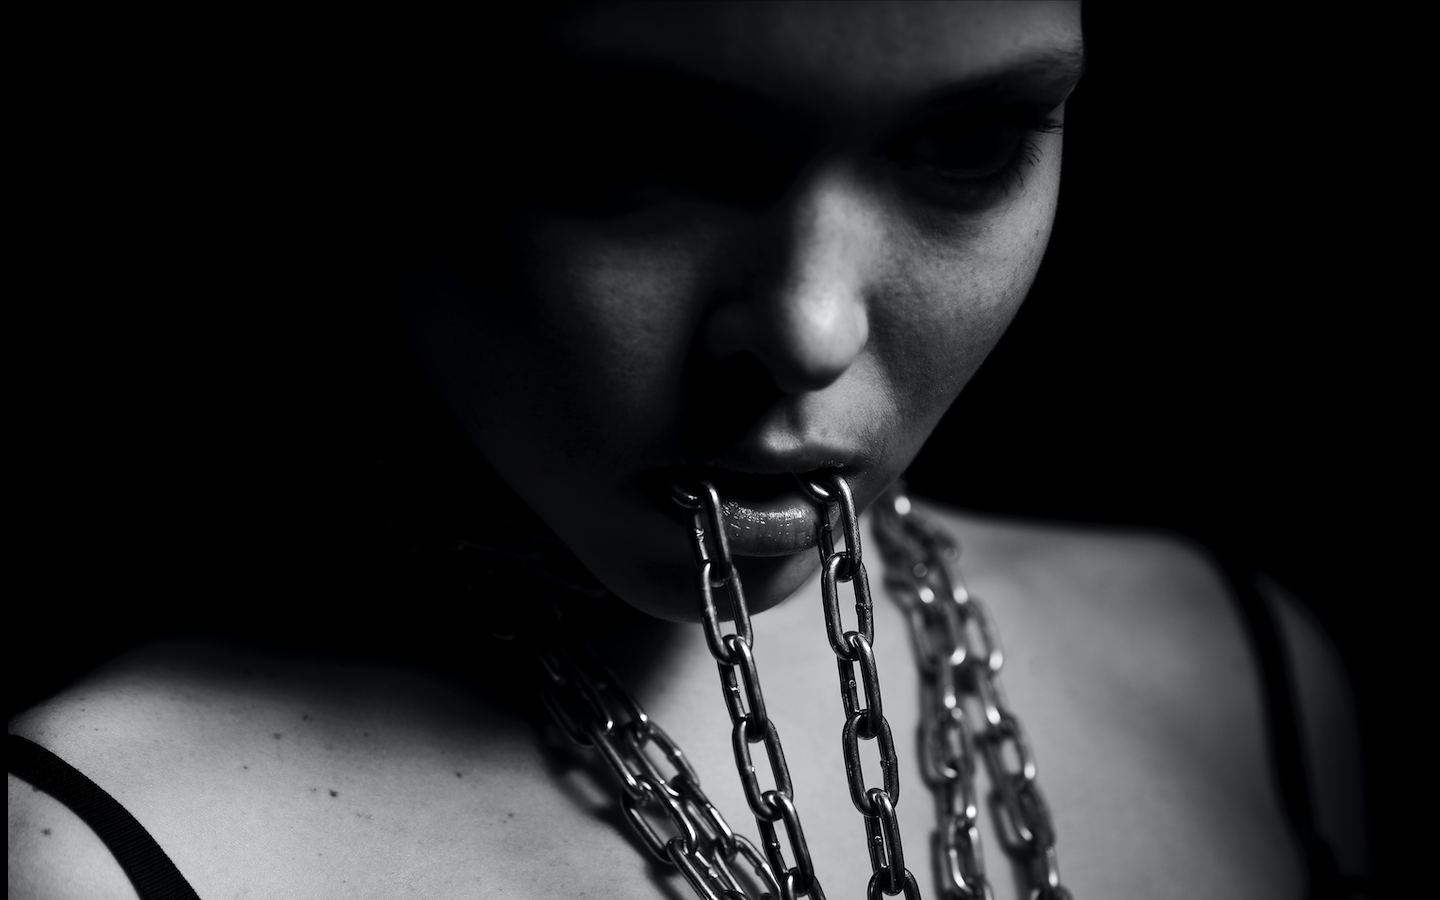 BDSM 101 The Rules and Pleasures of a Dominant-Submissive Relationship